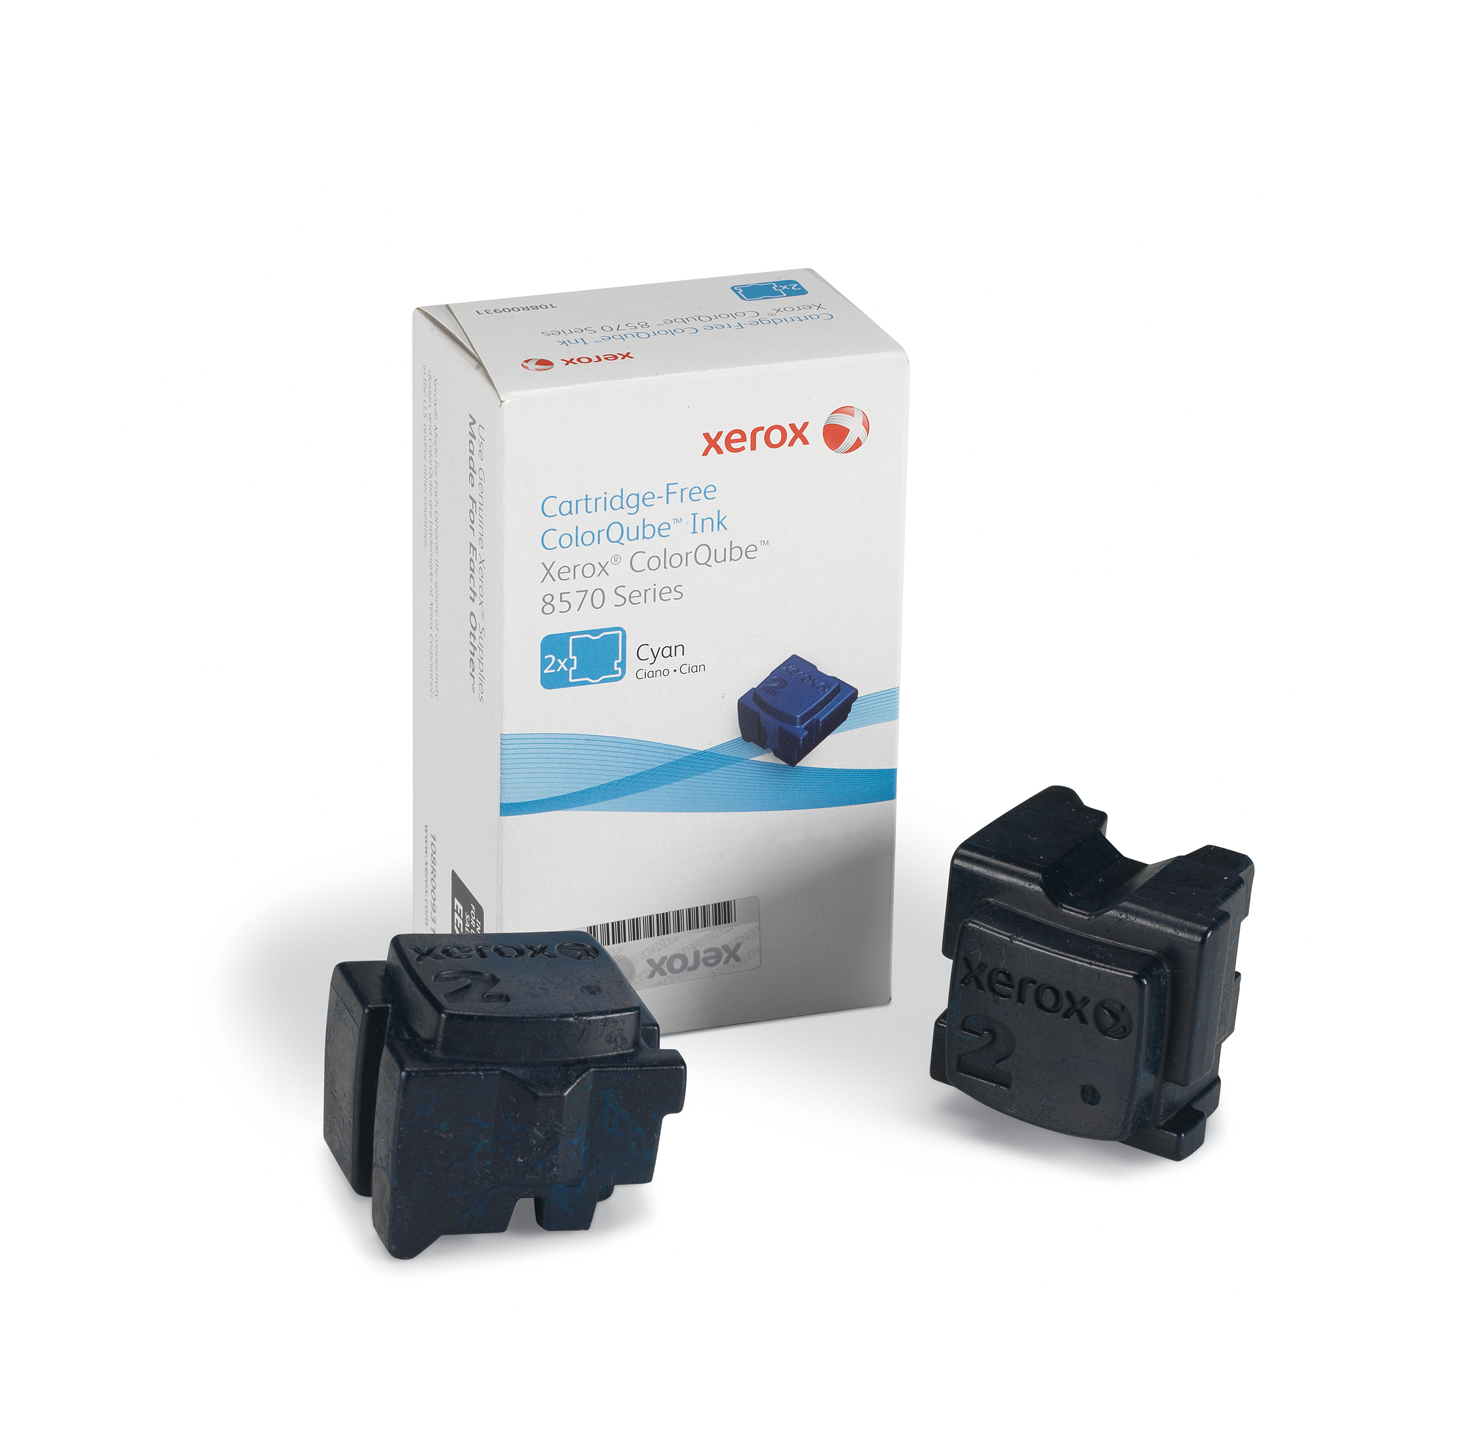 Xerox 108R00931 Dry ink in color-stix cyan twin pack, 2x4.4K pages Pack=2 for Xerox ColorQube 8570